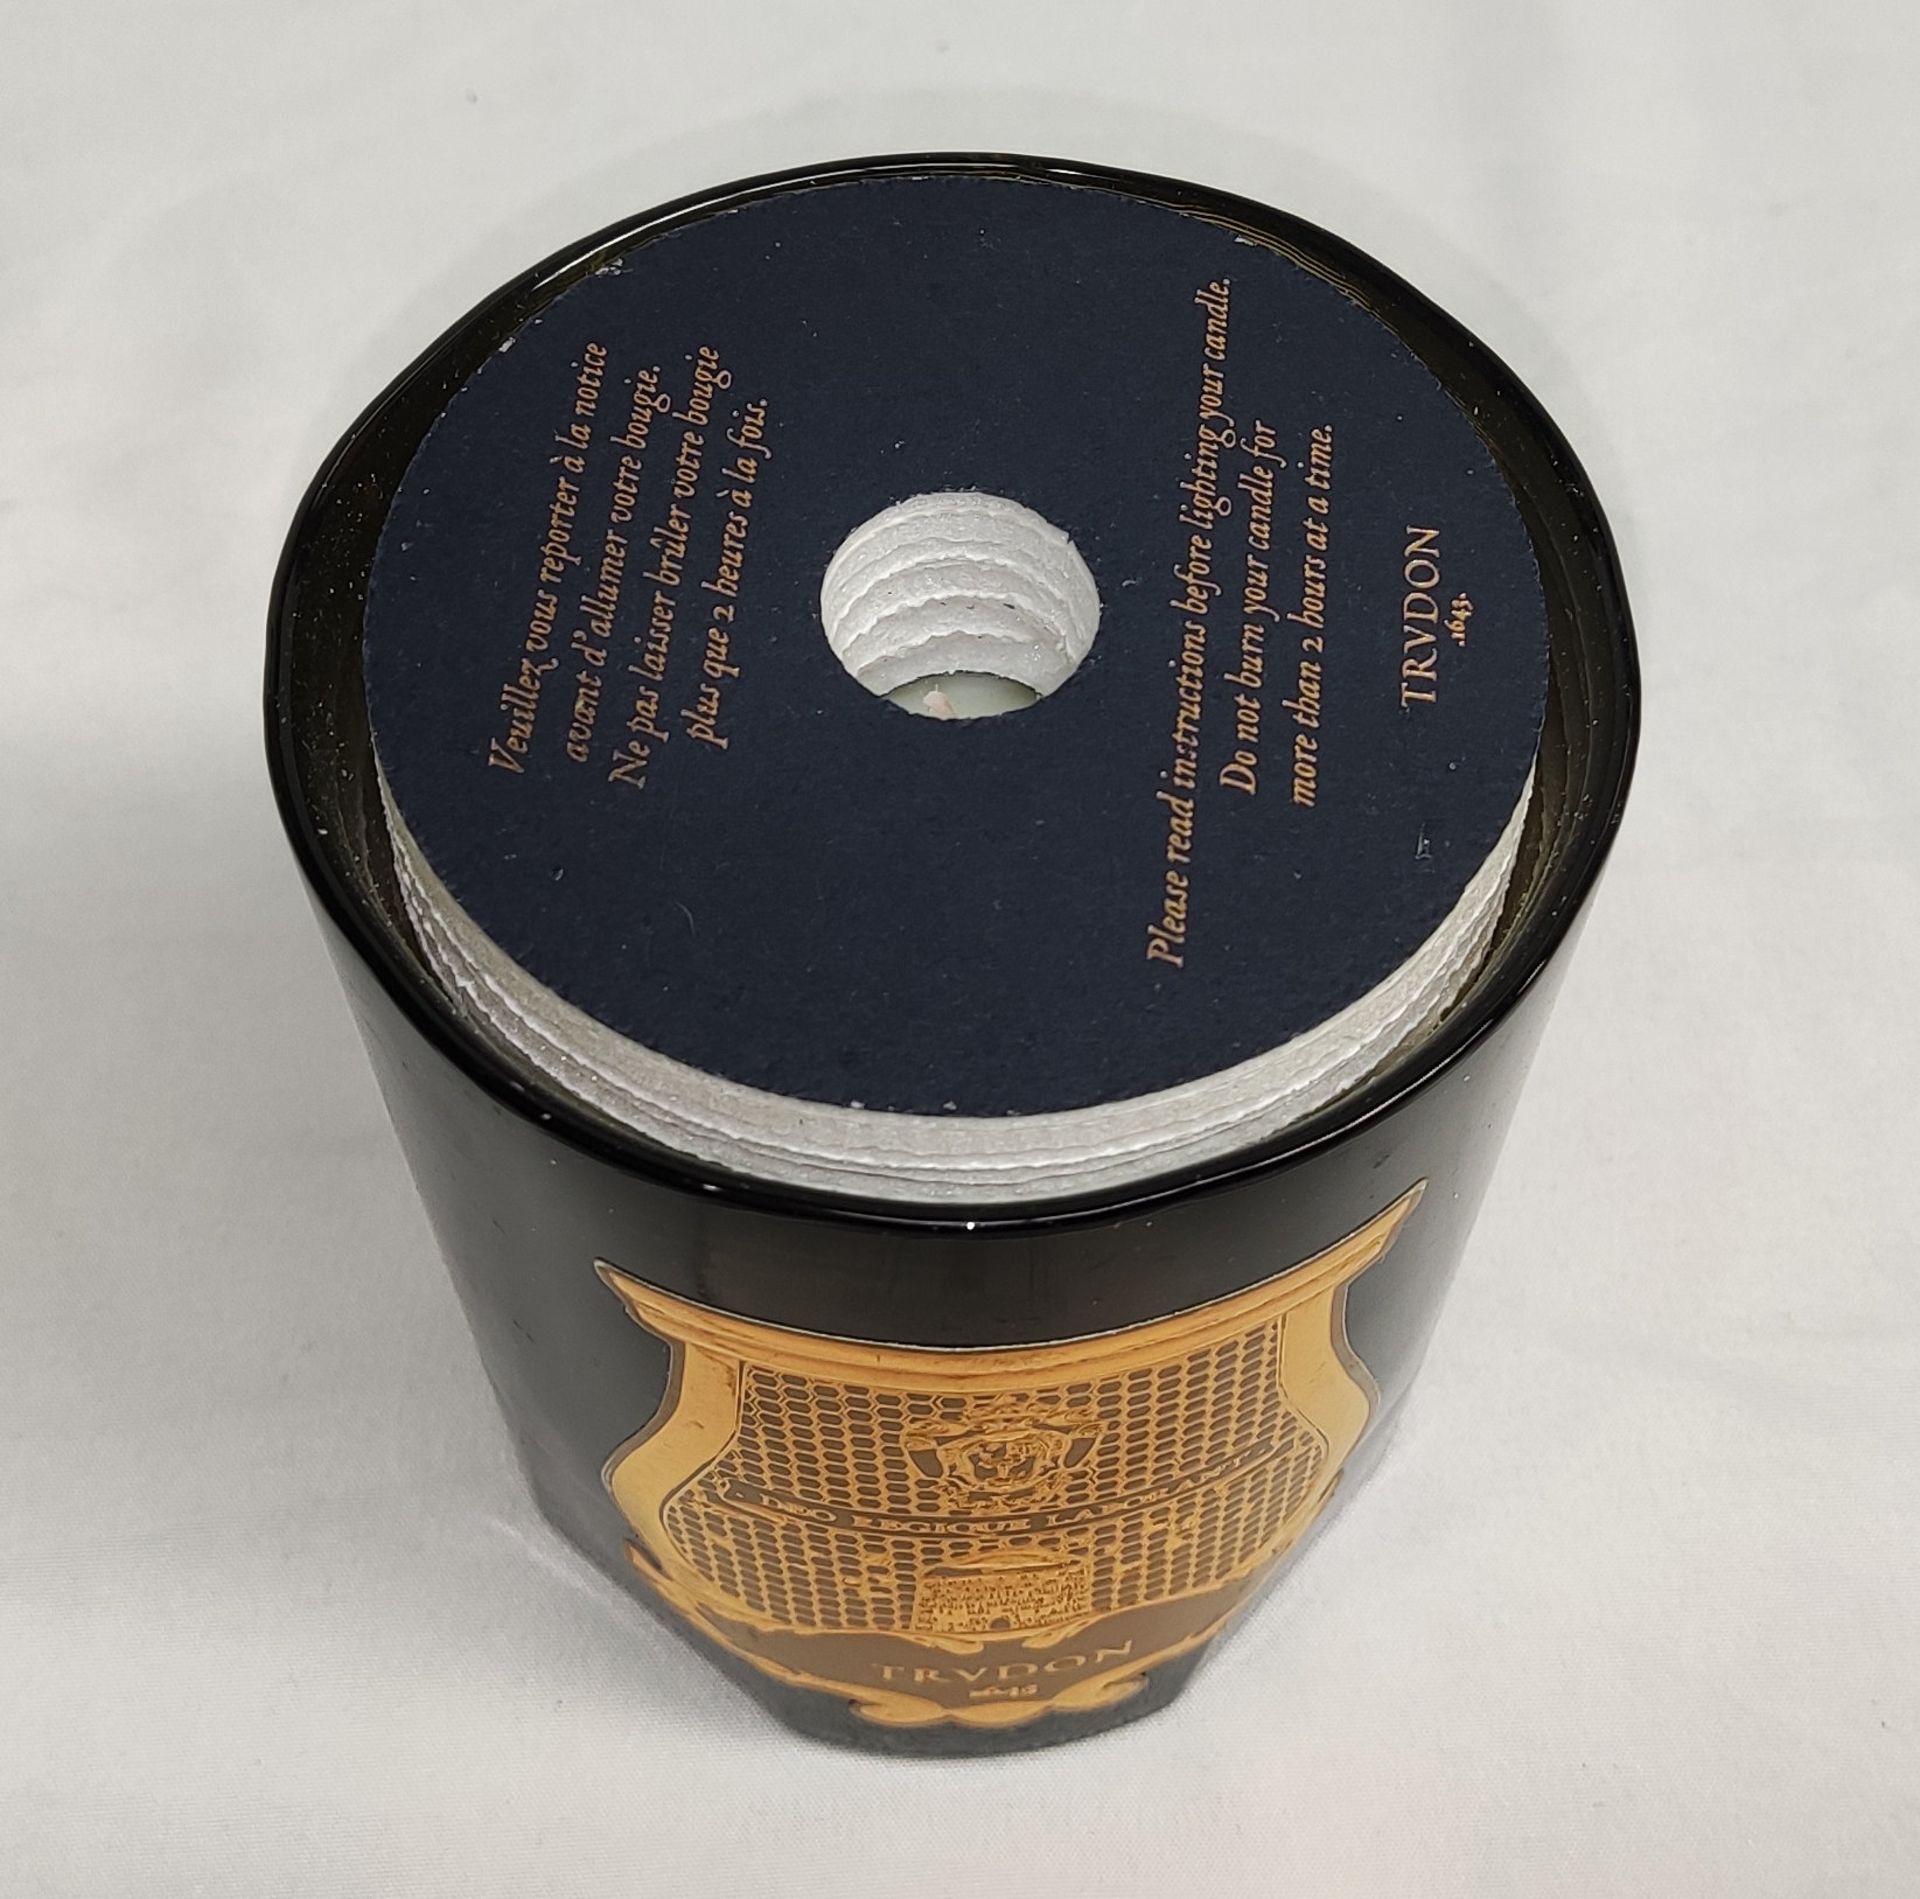 1 x TRUDON Ernesto 270G Candle - Boxed - Original RRP £90 - Ref: 2559342/HJL409/C27/07-23 - - Image 4 of 16